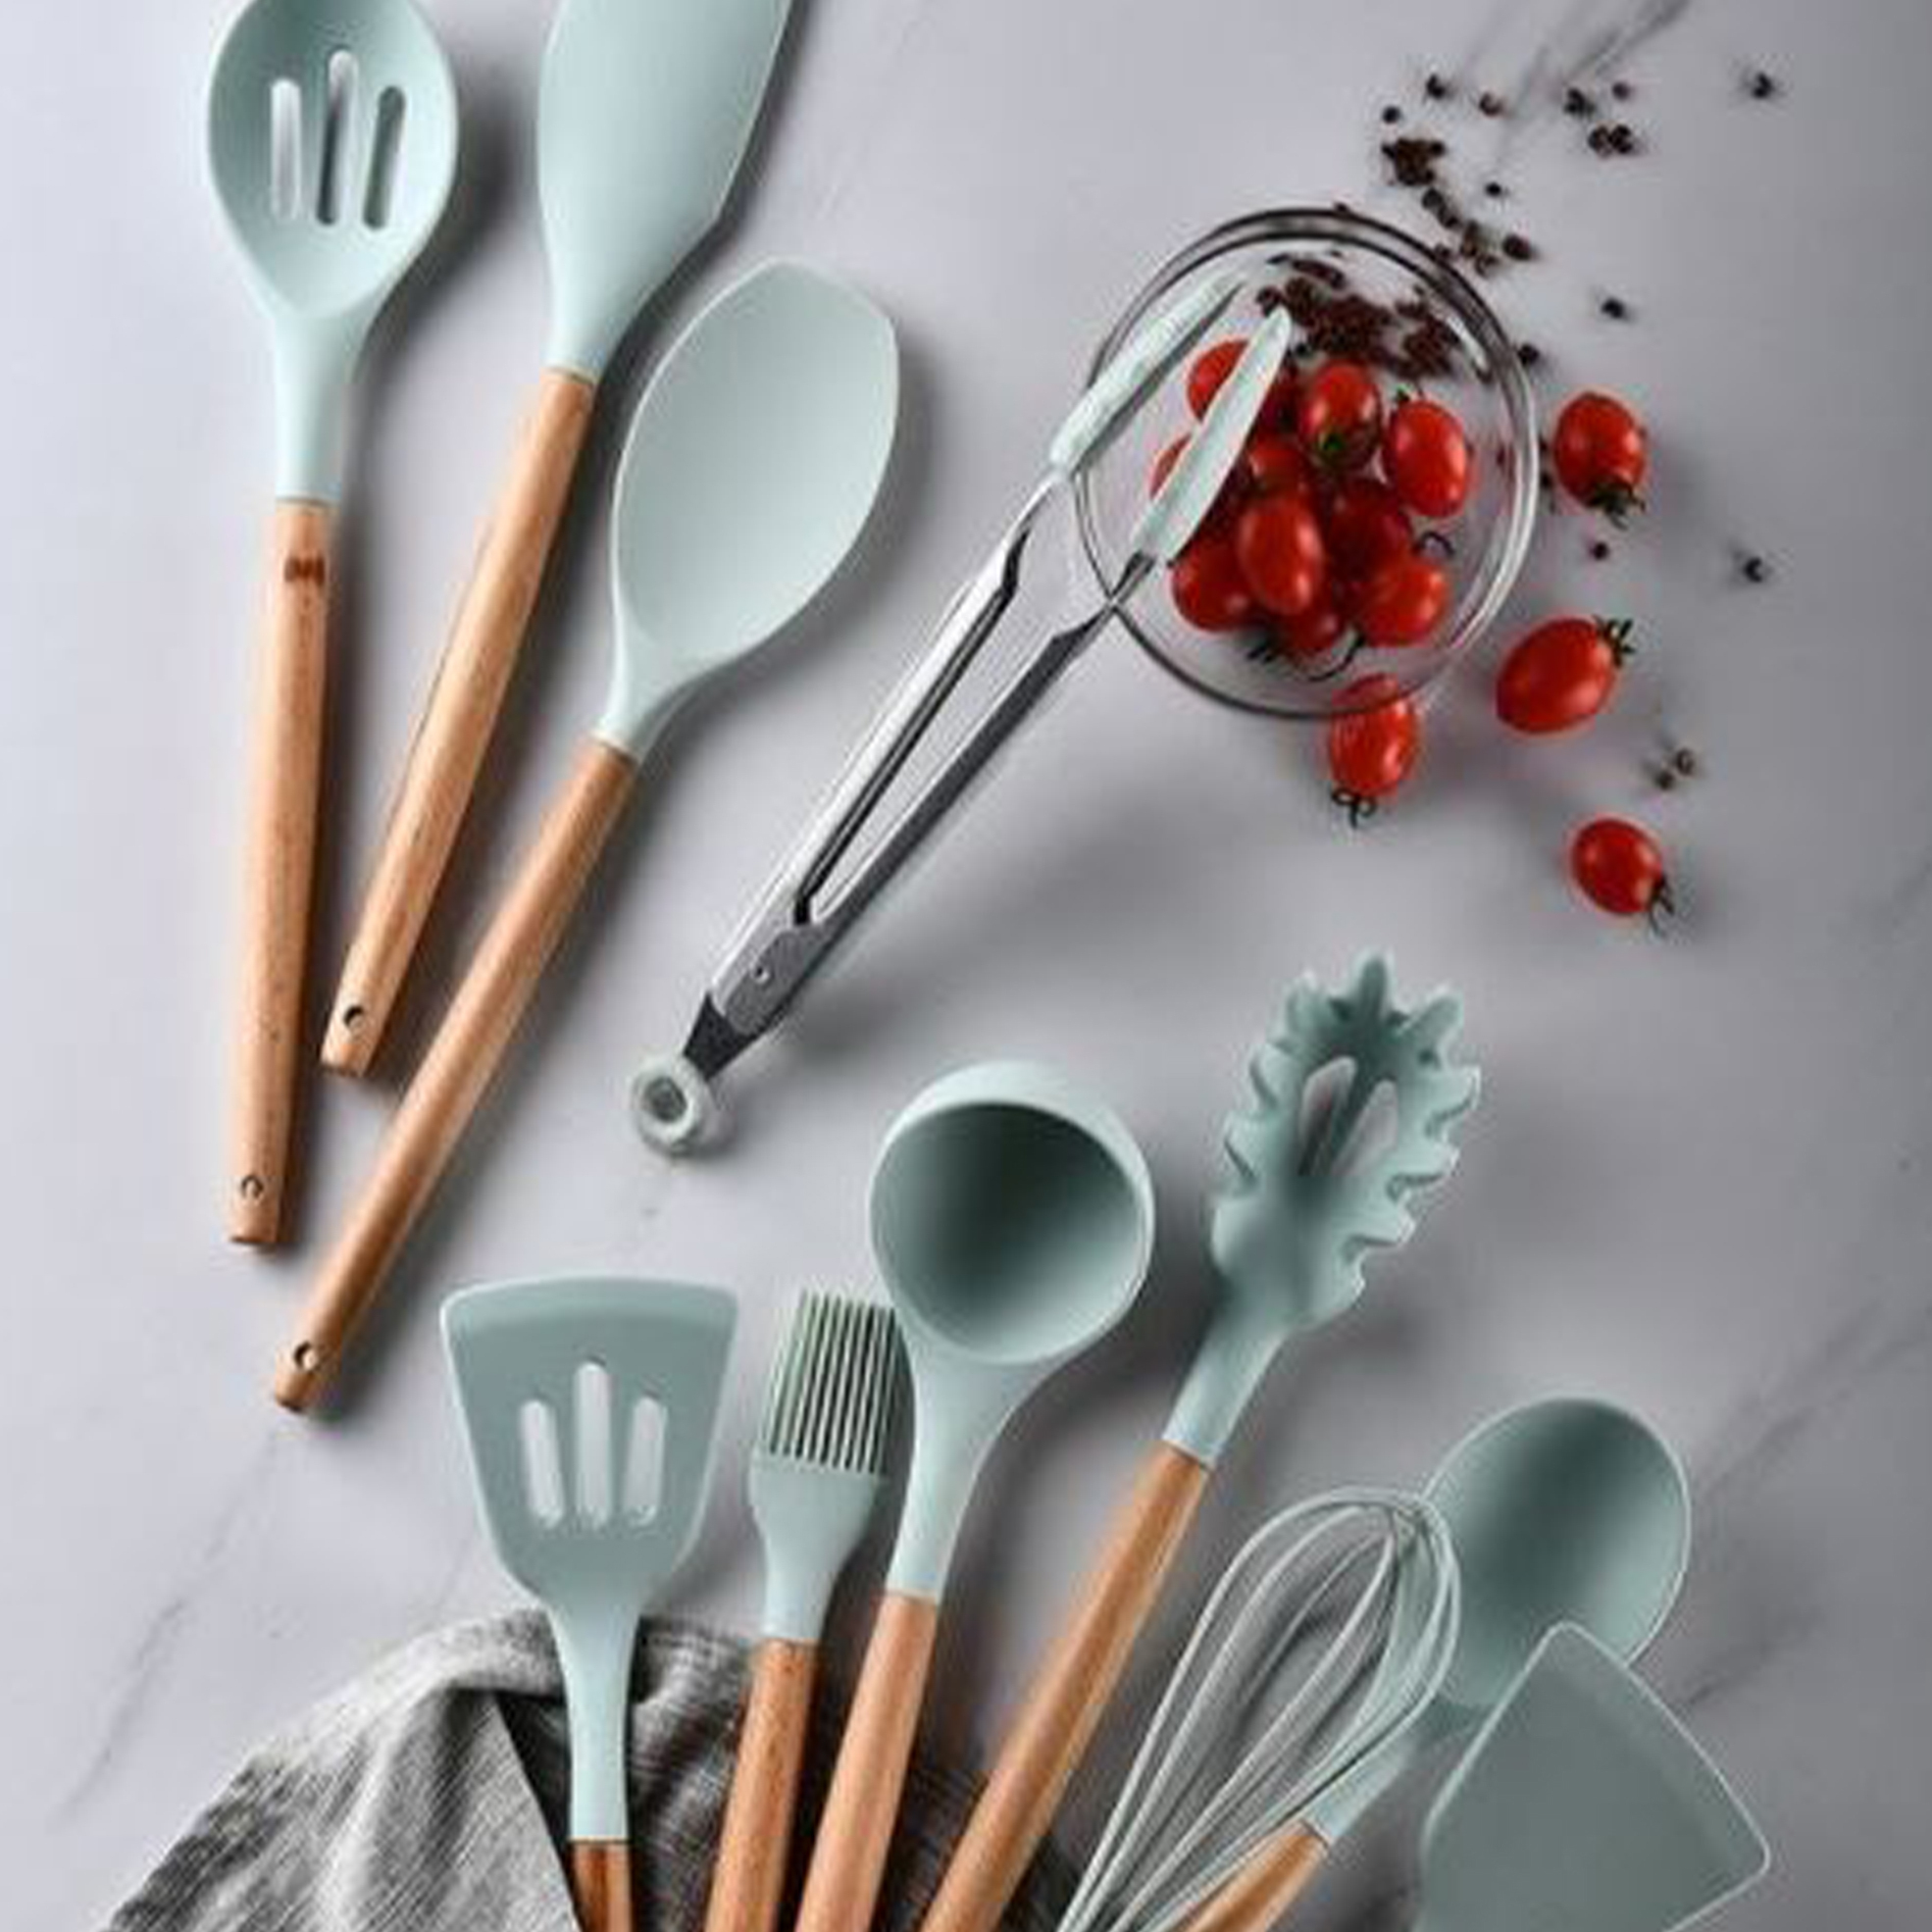 Up To 28% Off on Silicone Cooking Utensil Set